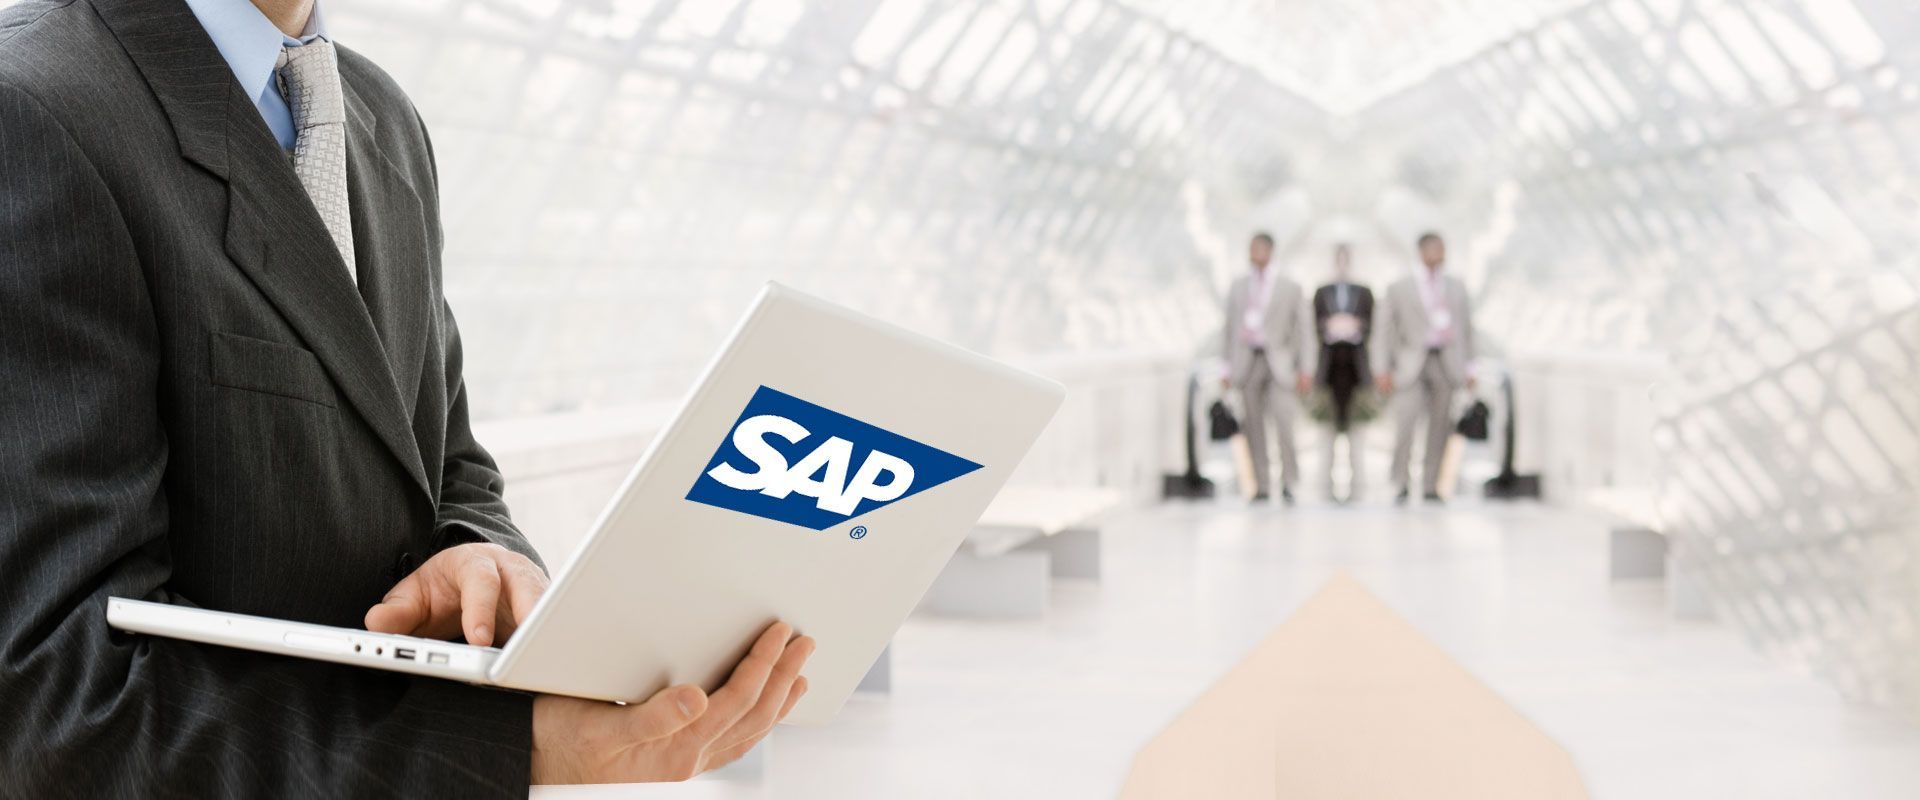 AnyConv.com  SAP cloud platform Malaysia - 5 Ways SAP Consulting Services Partner Can Help You In Your SAP Roadmap